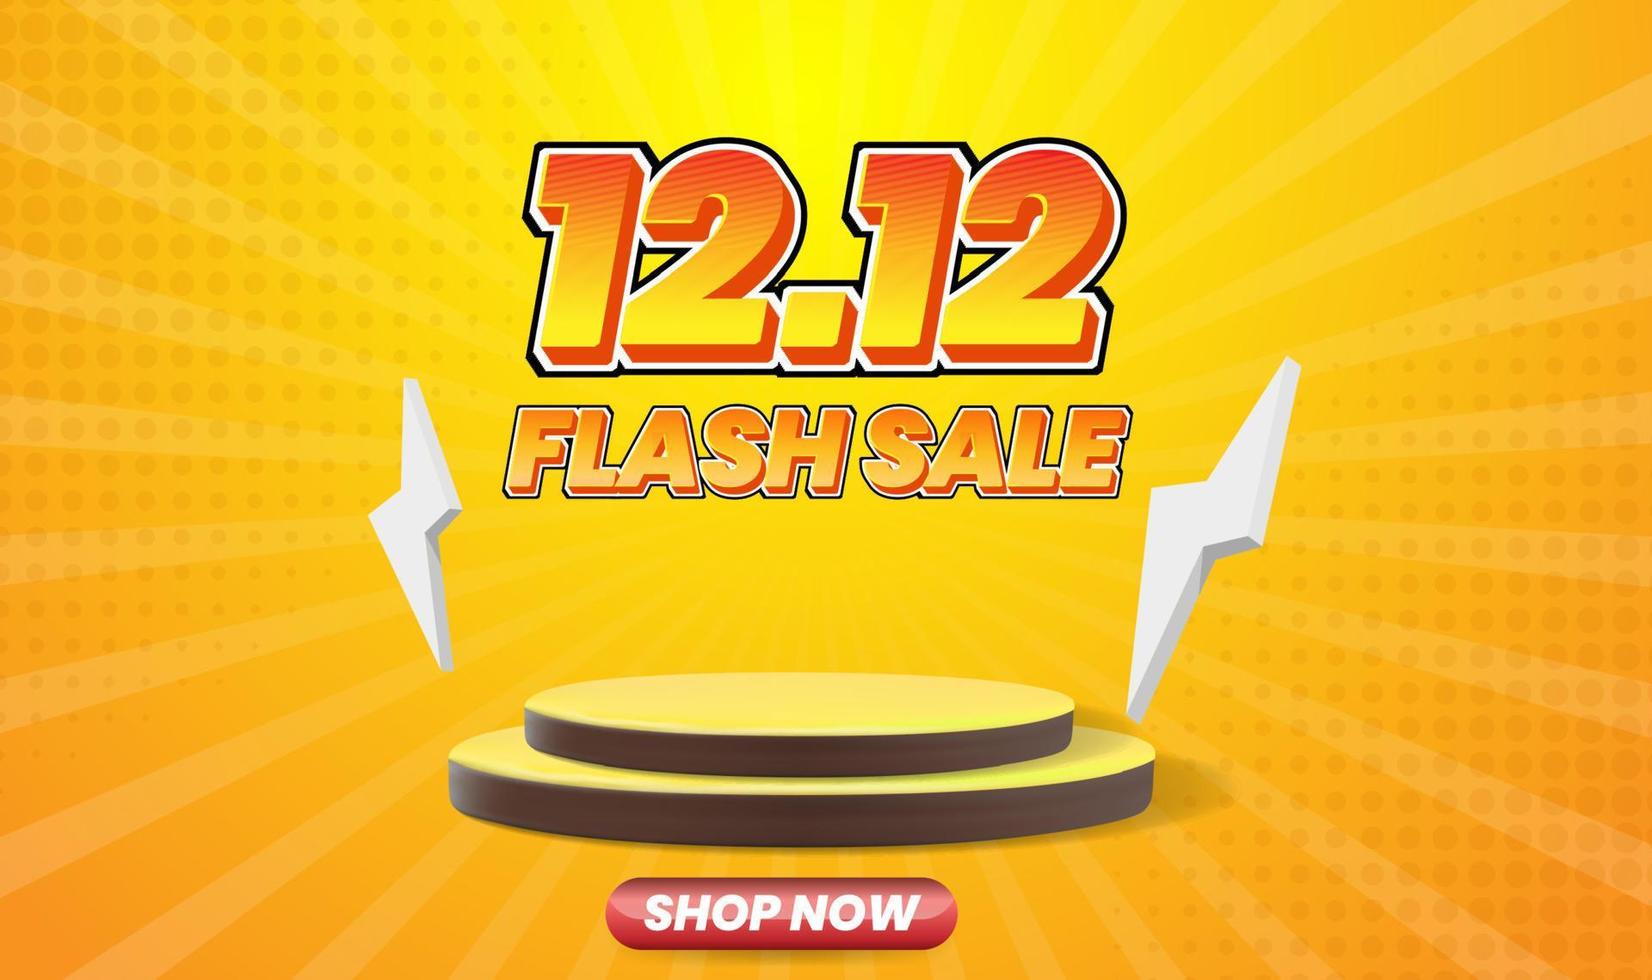 12.12 shopping day mega sale banner or poster with realistic podium vector